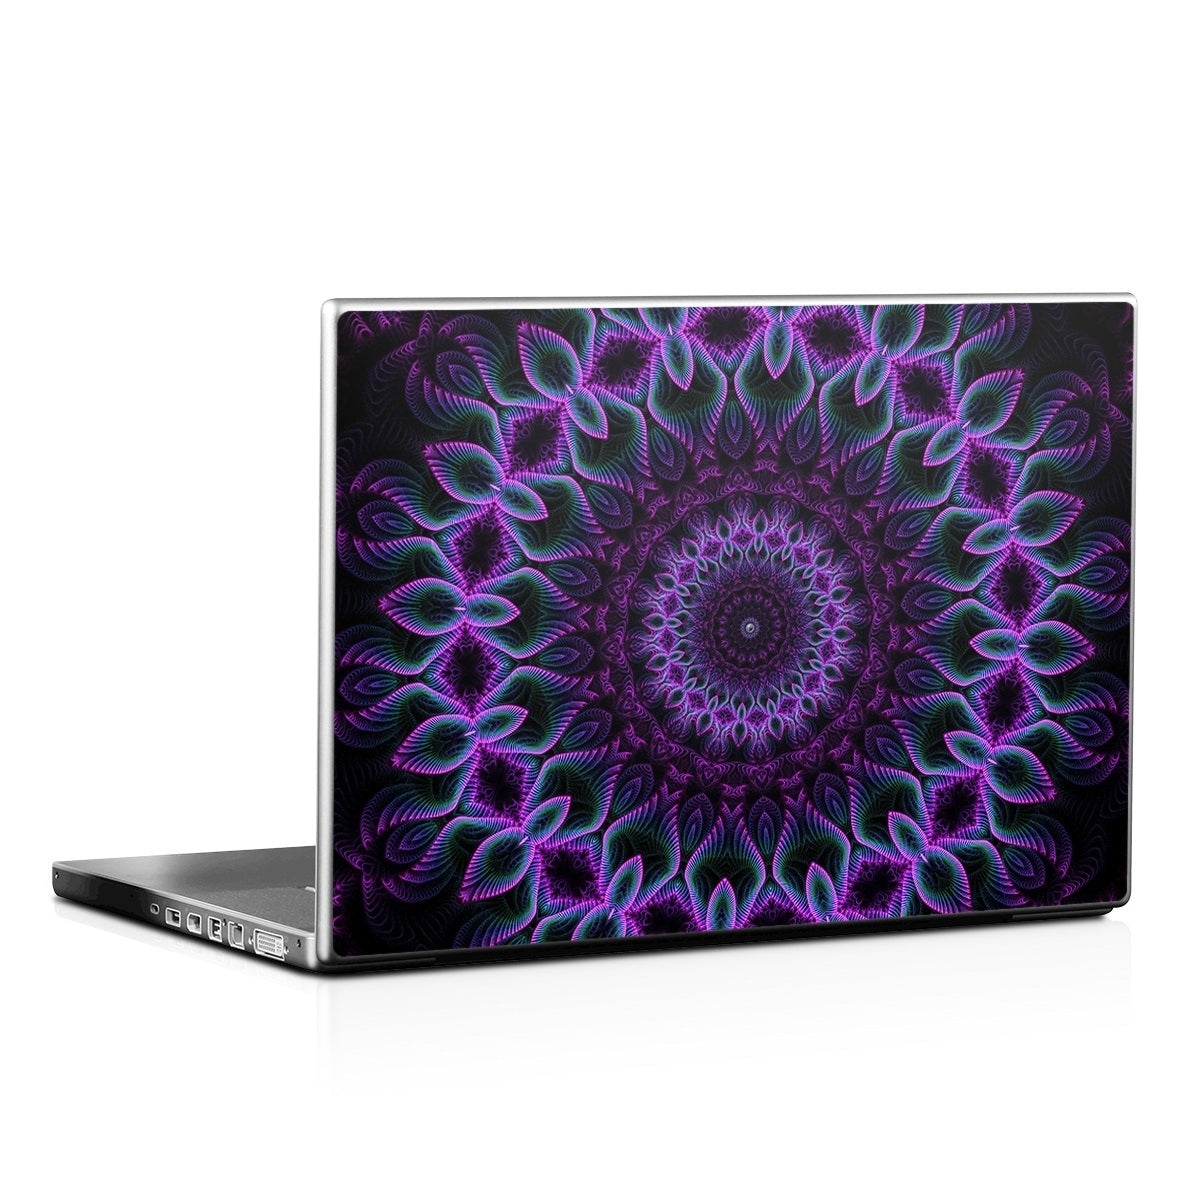 Silence In An Infinite Moment - Laptop Lid Skin